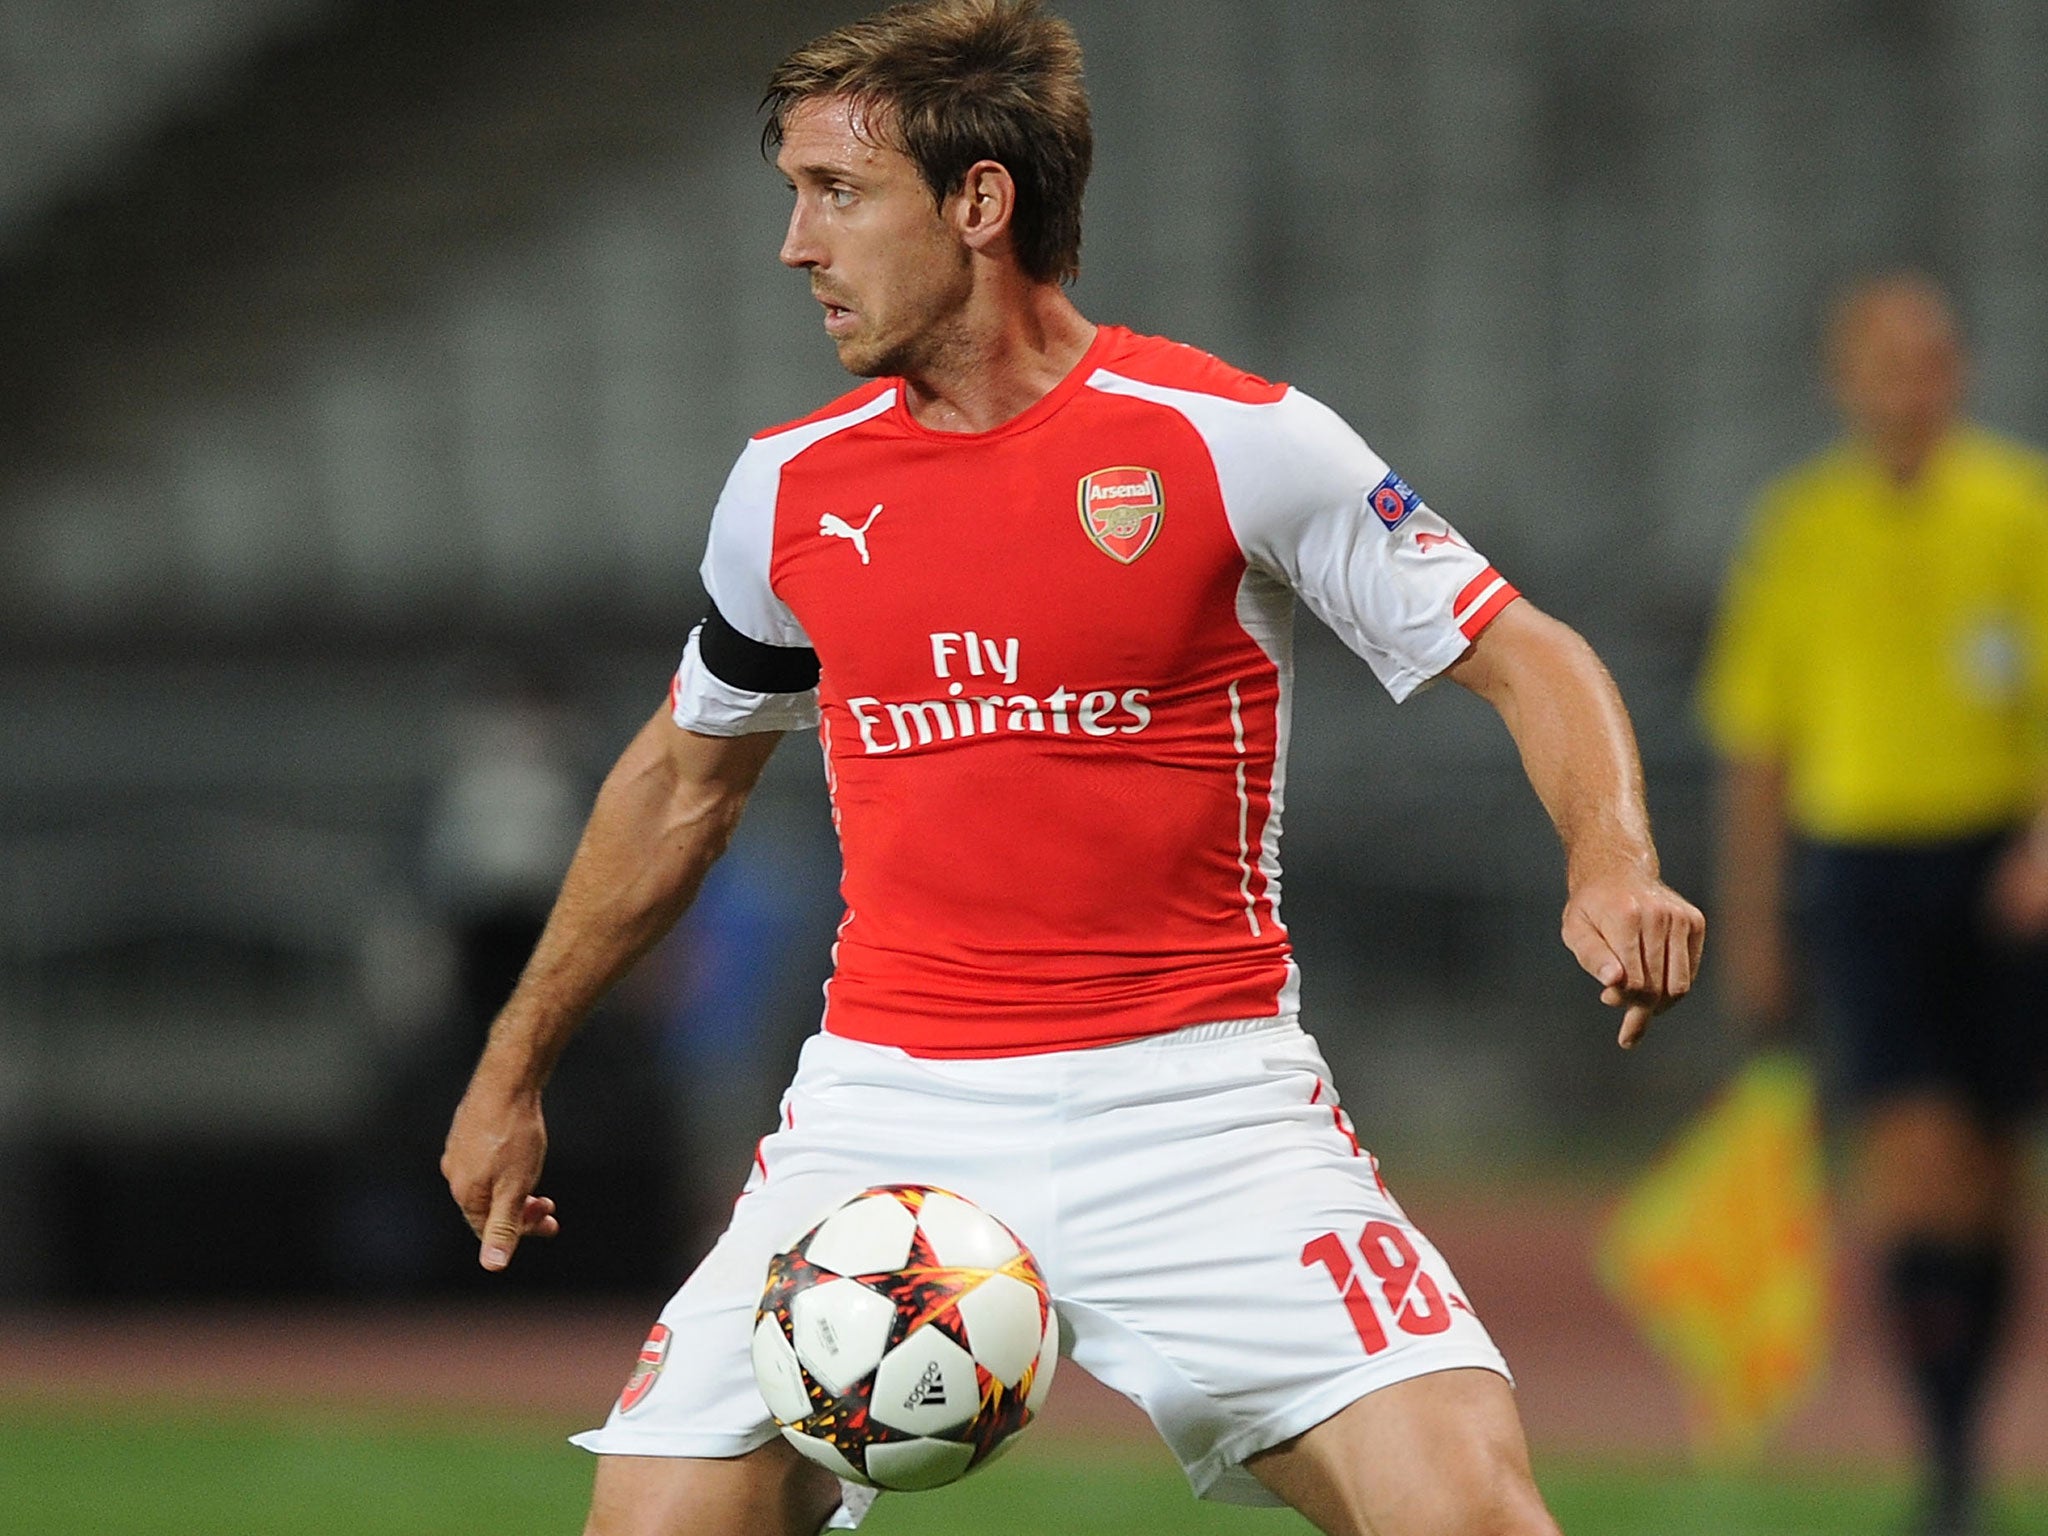 Nacho Monreal could move across to centre-back